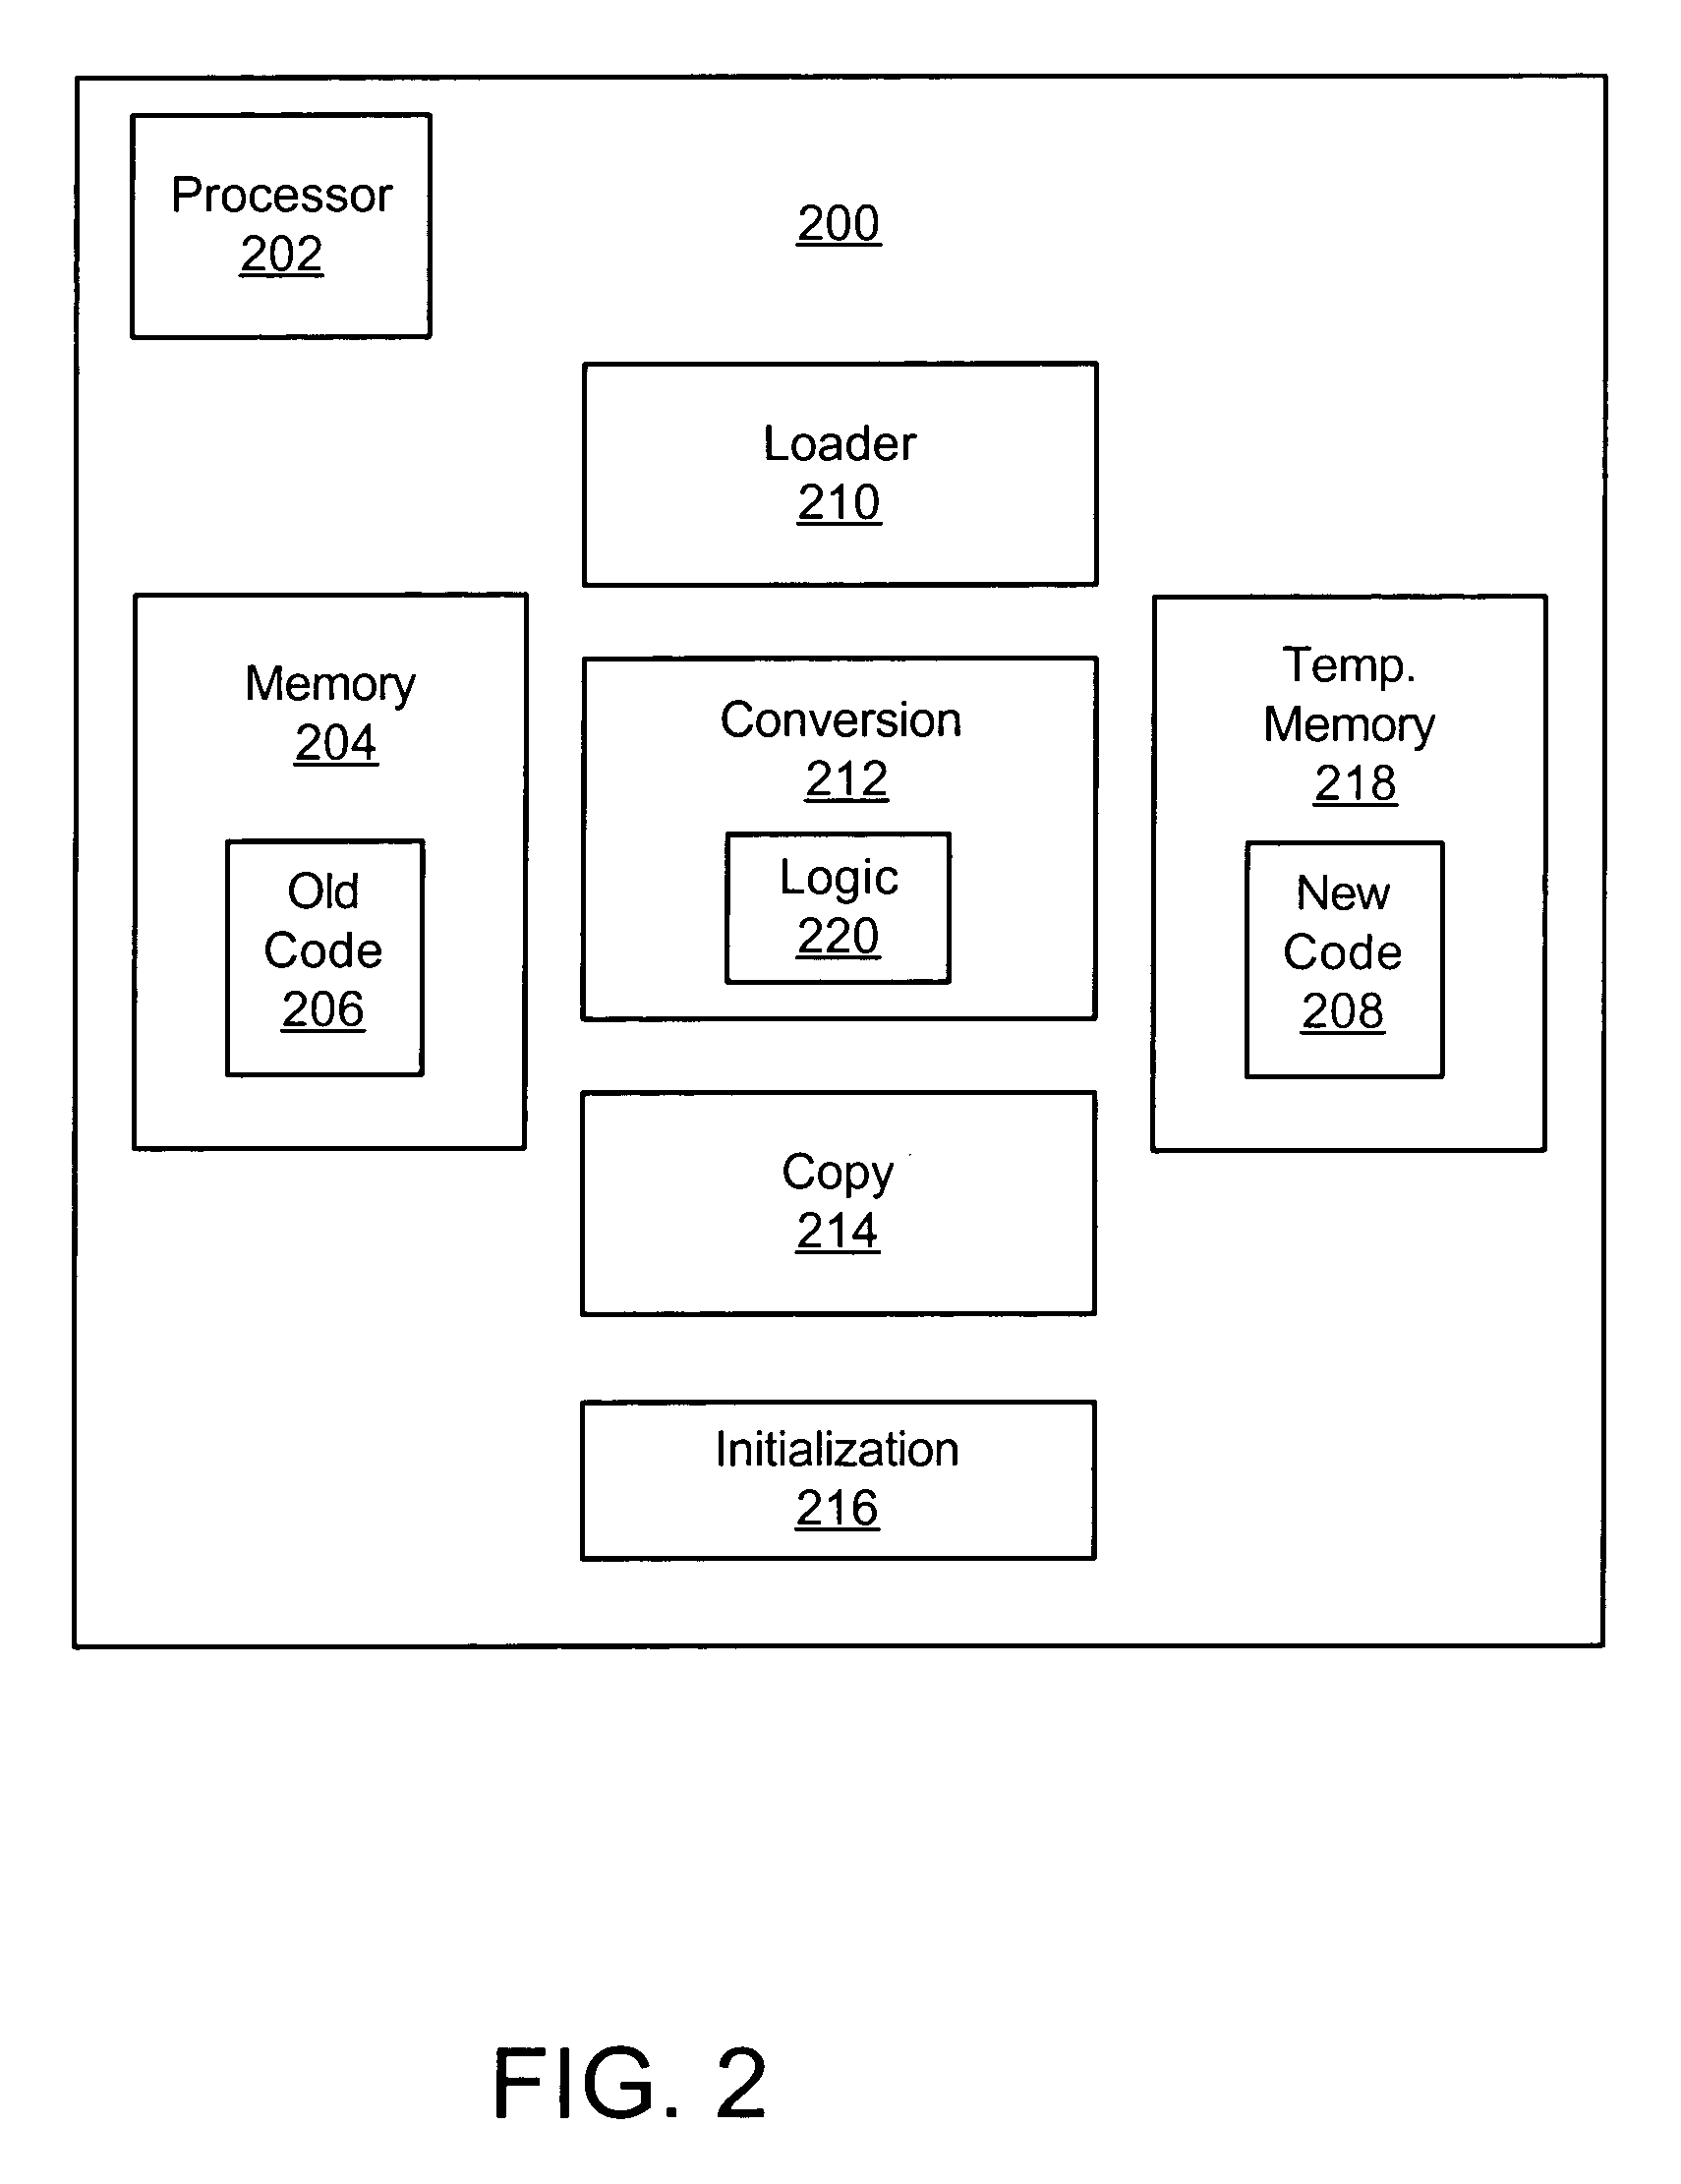 Apparatus, system, and method for updating an embedded code image